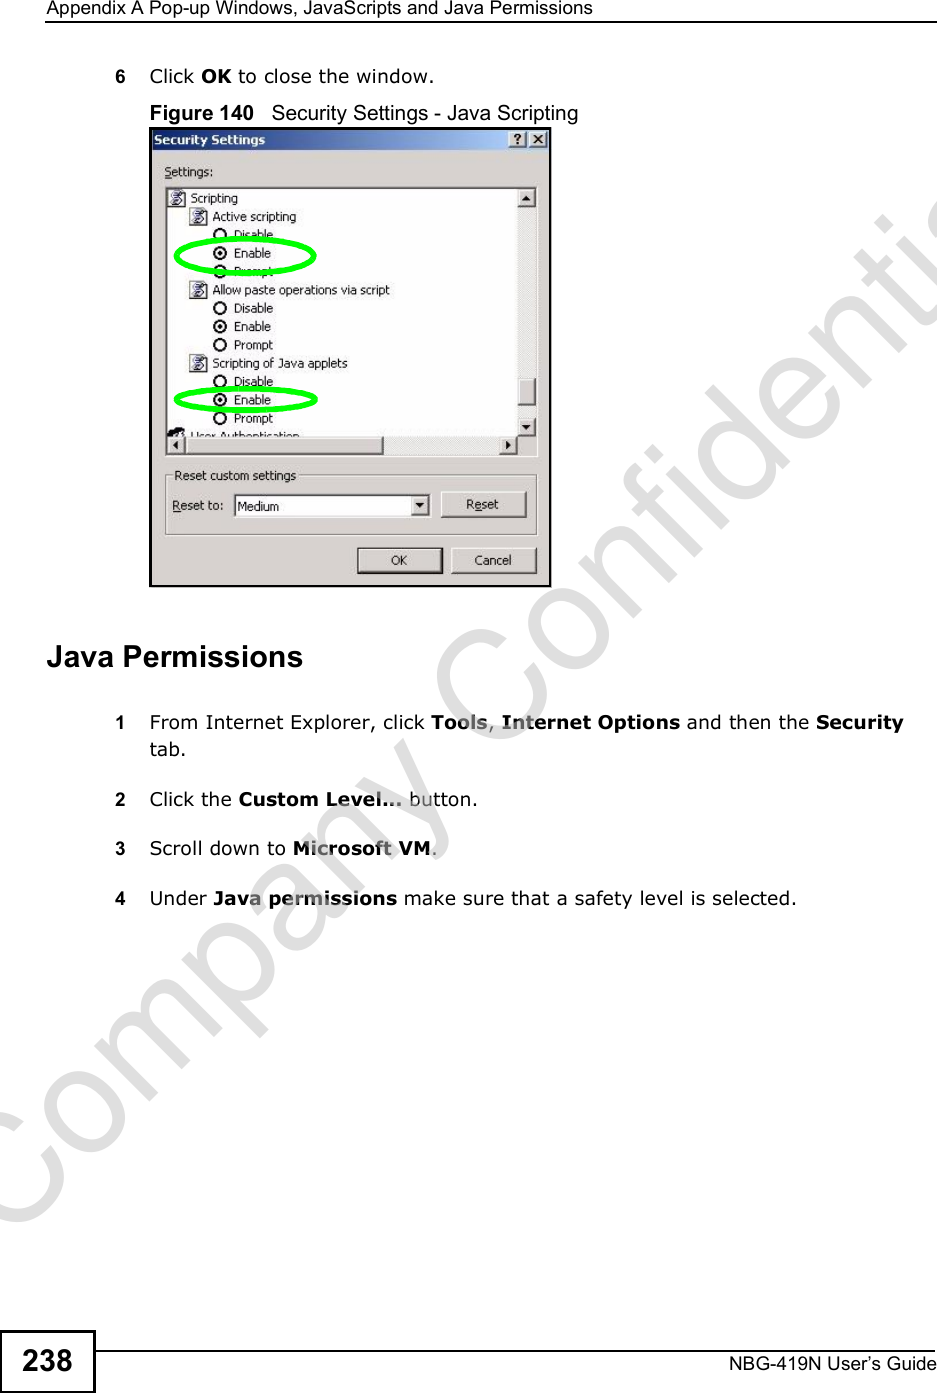 Appendix APop-up Windows, JavaScripts and Java PermissionsNBG-419N User s Guide2386Click OK to close the window.Figure 140   Security Settings - Java ScriptingJava Permissions1From Internet Explorer, click Tools, Internet Options and then the Security tab. 2Click the Custom Level... button. 3Scroll down to Microsoft VM. 4Under Java permissions make sure that a safety level is selected.Company Confidential